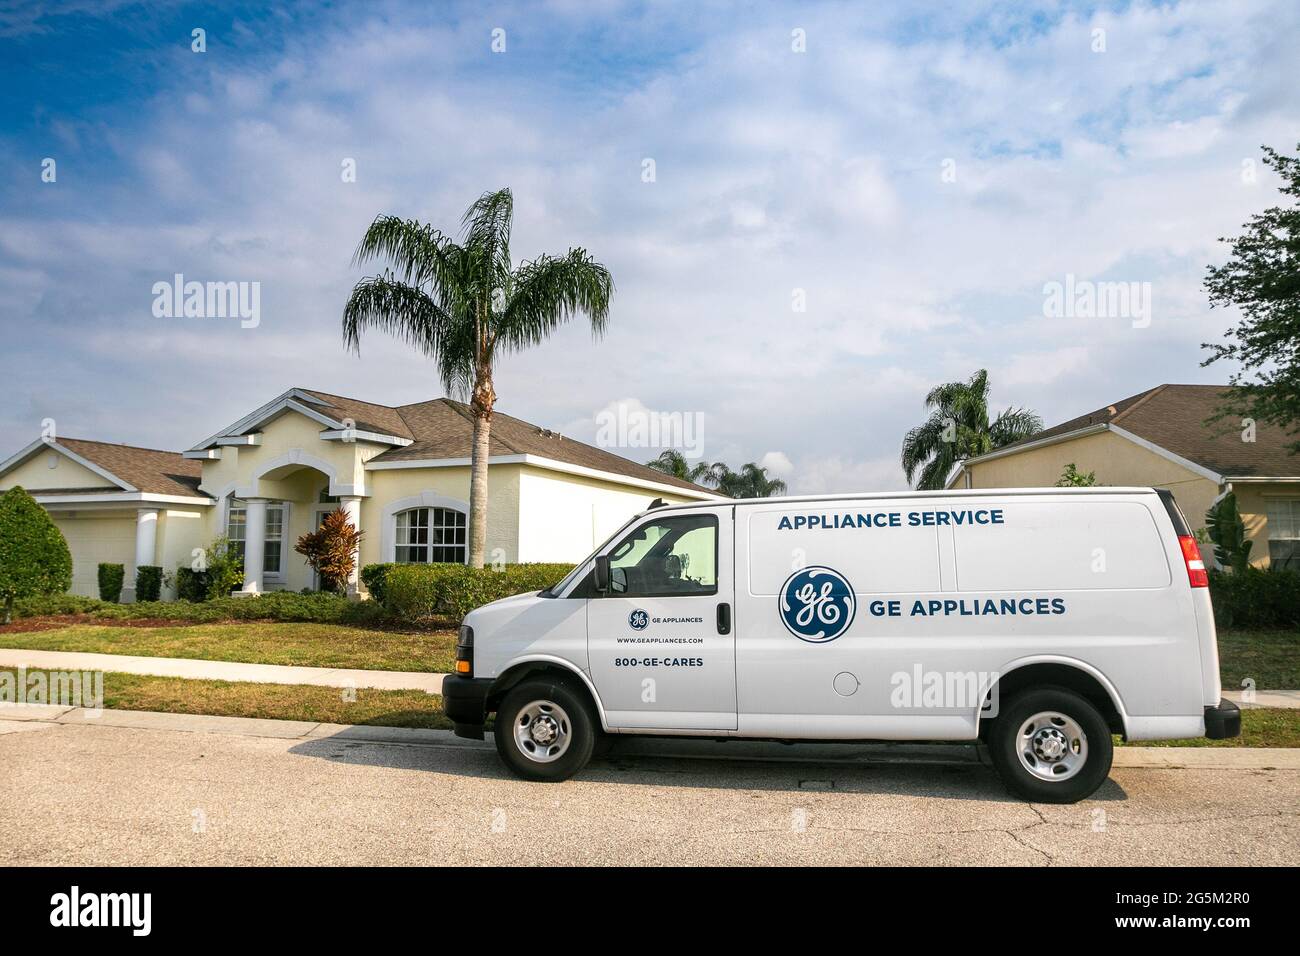 Bradenton, FL, 4/9/2020: GE Appliances van is parked in a residential area. Stock Photo